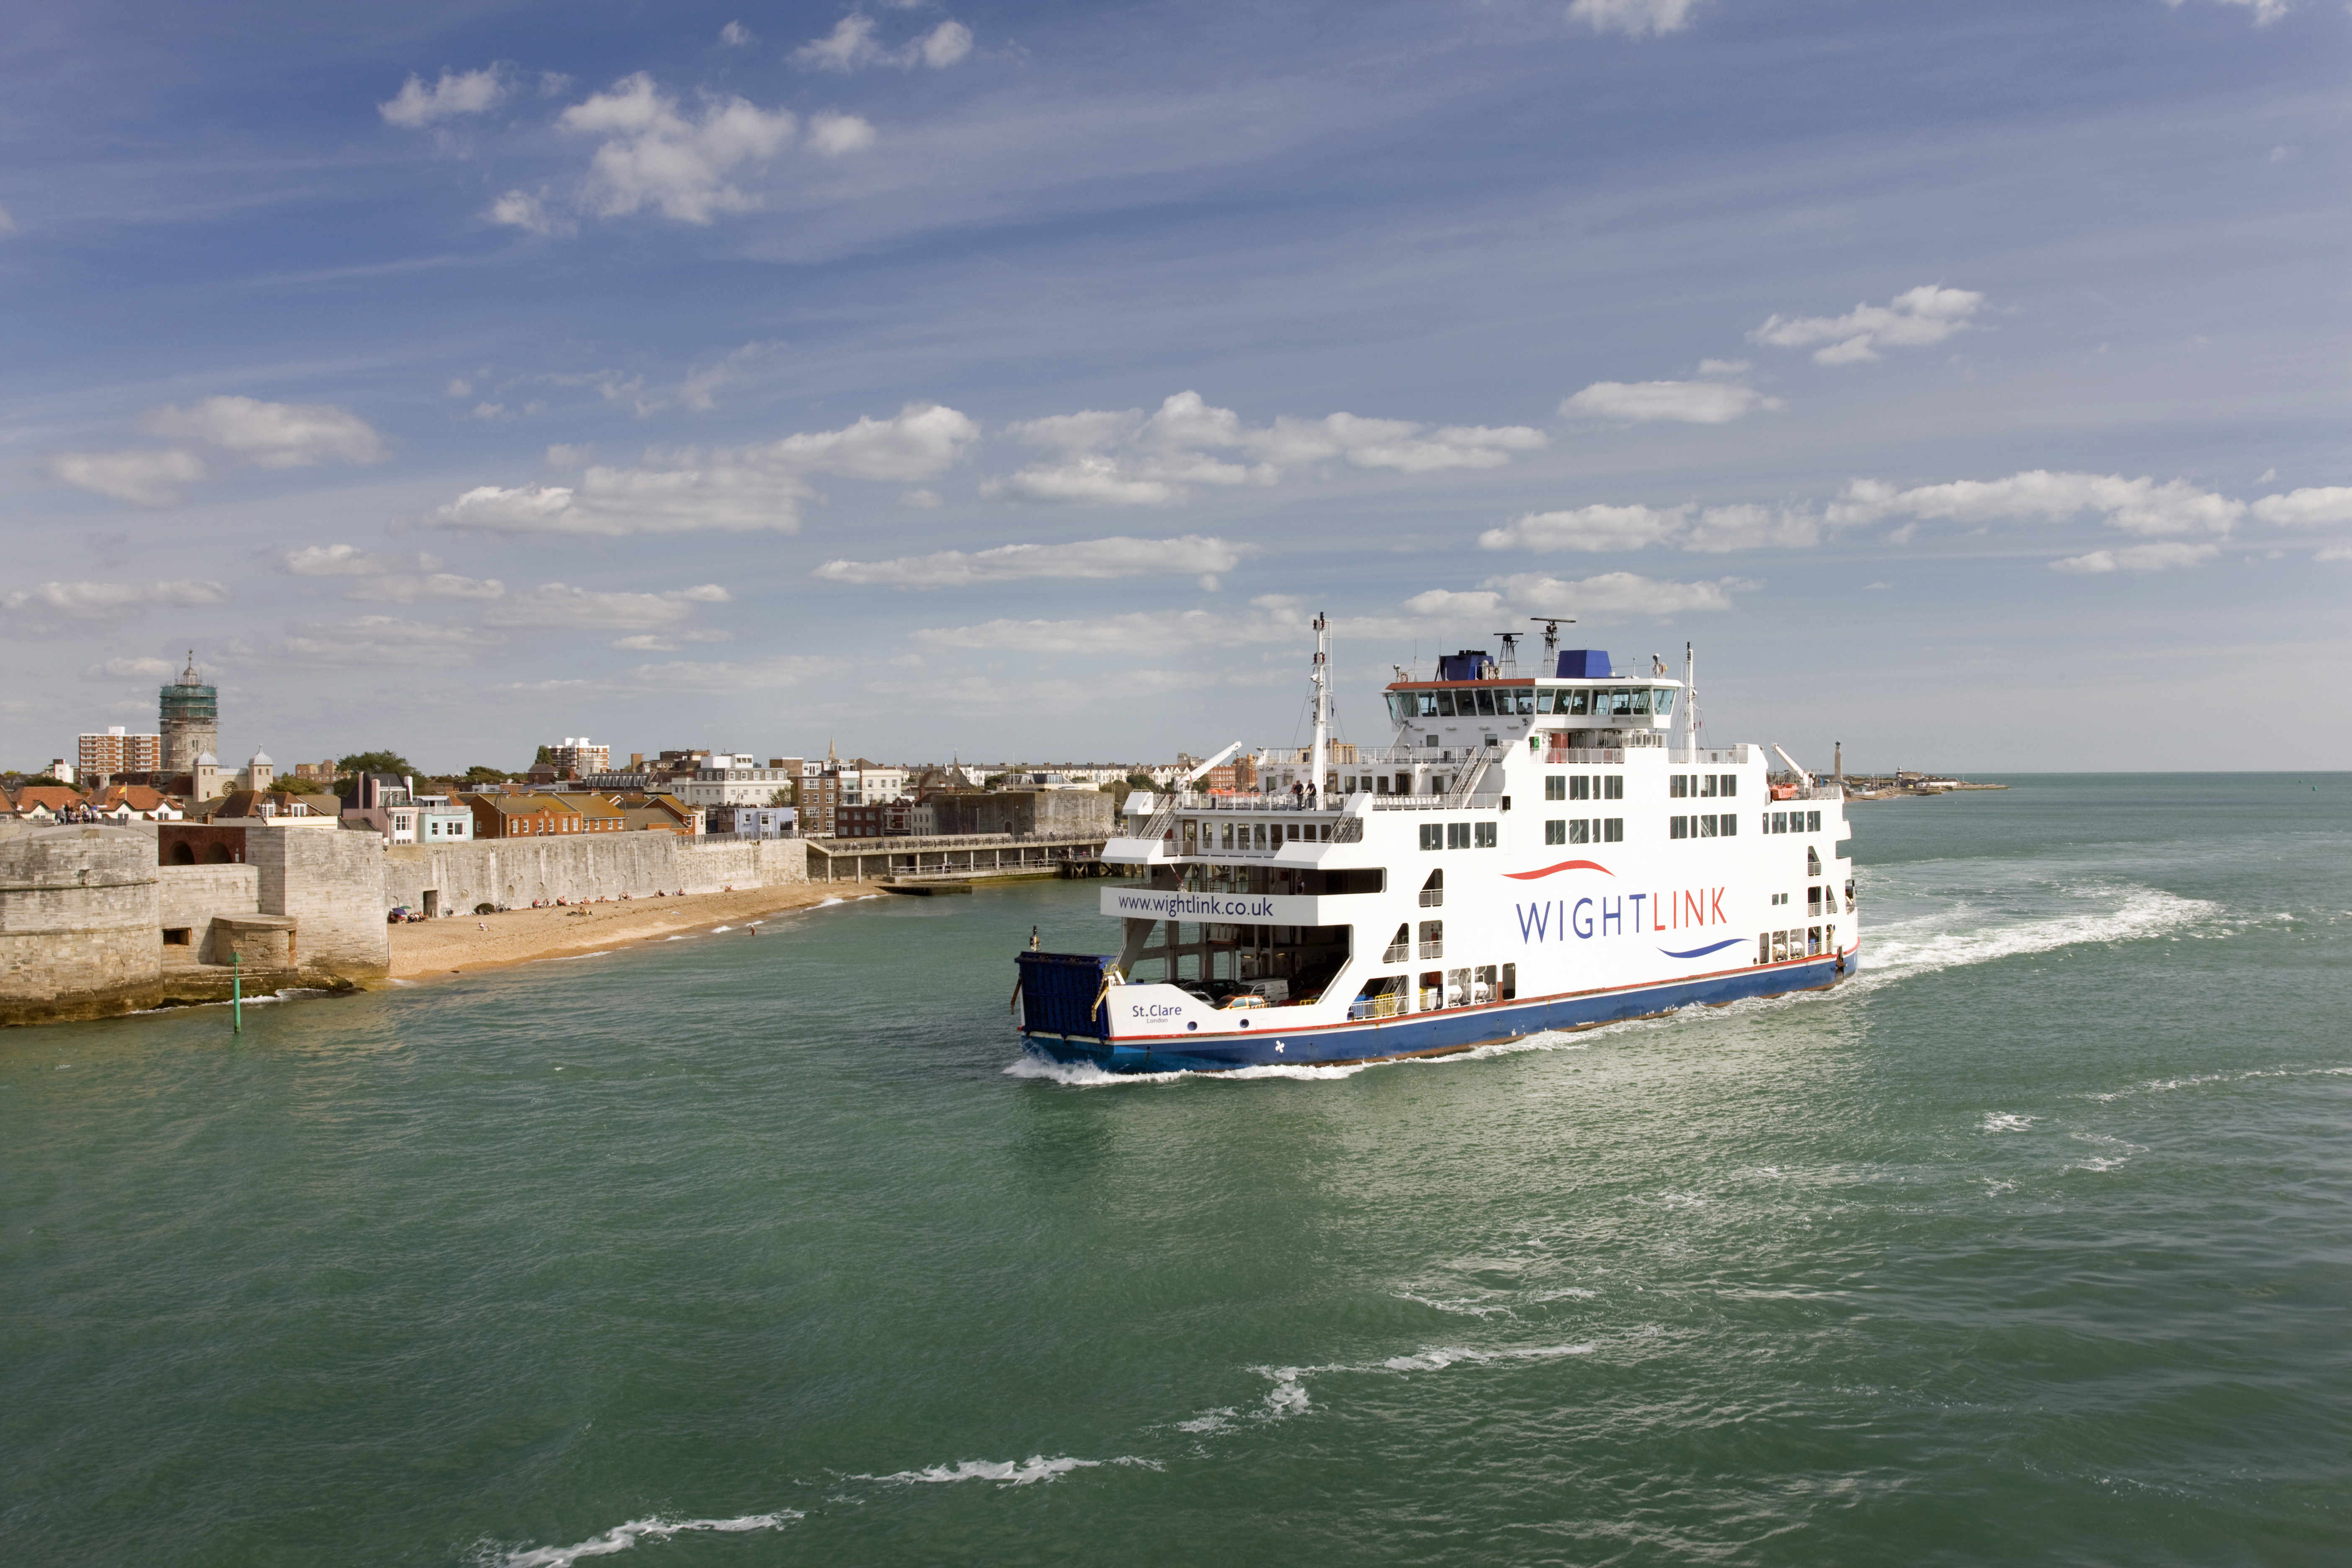 A photo of a Wightlink ferry at Portsmouth Harbour Mouth